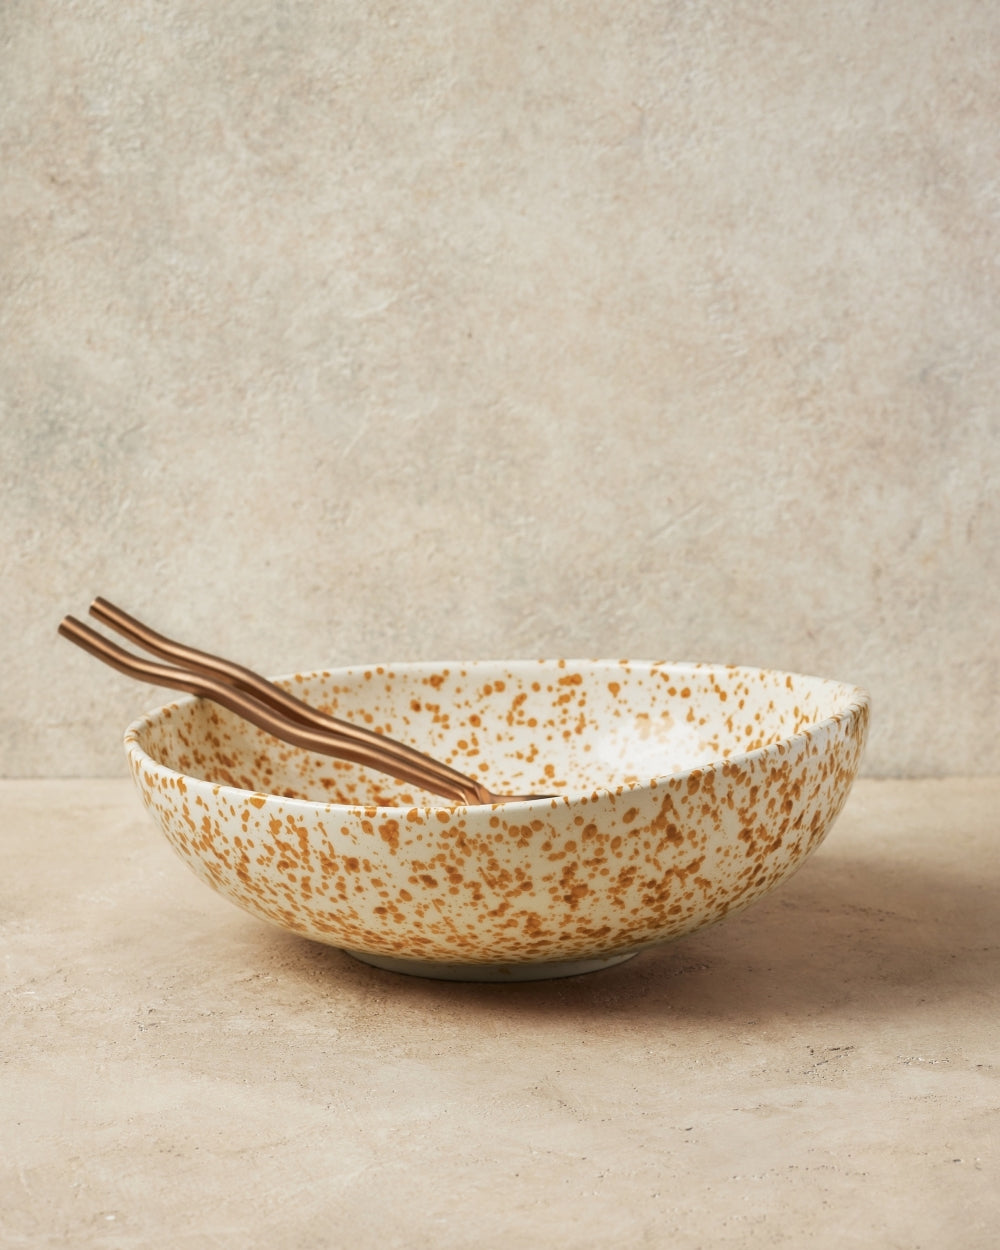 Wayfair, Mixing Bowls With Lids, Up to 40% Off Until 11/20